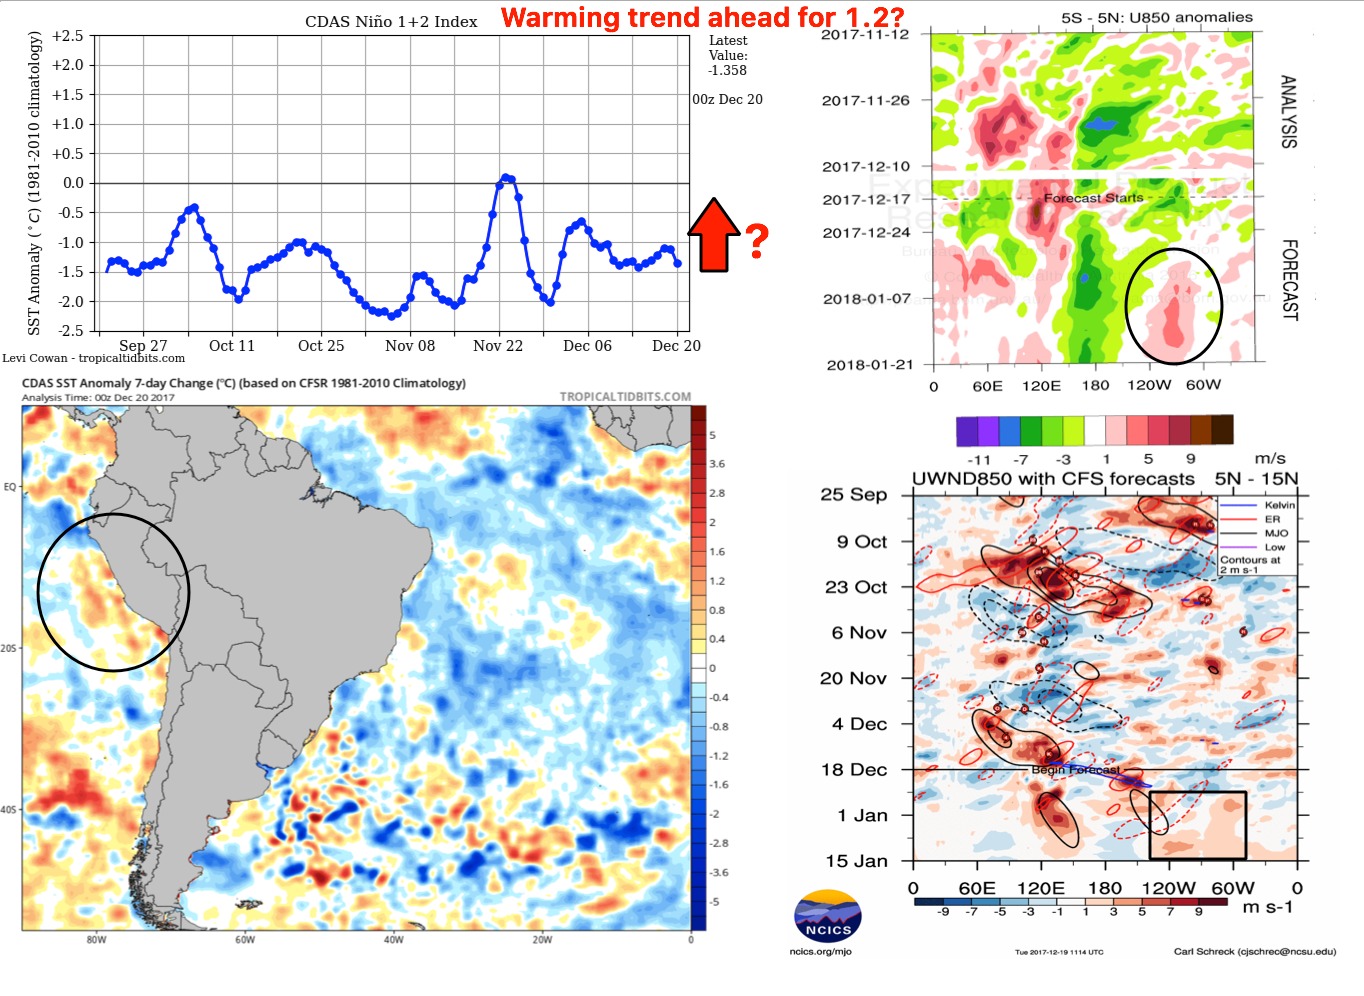 12-20-17 South America: Risks of a wetter pattern than modeled for Jan? Must watch update today, details here. K.